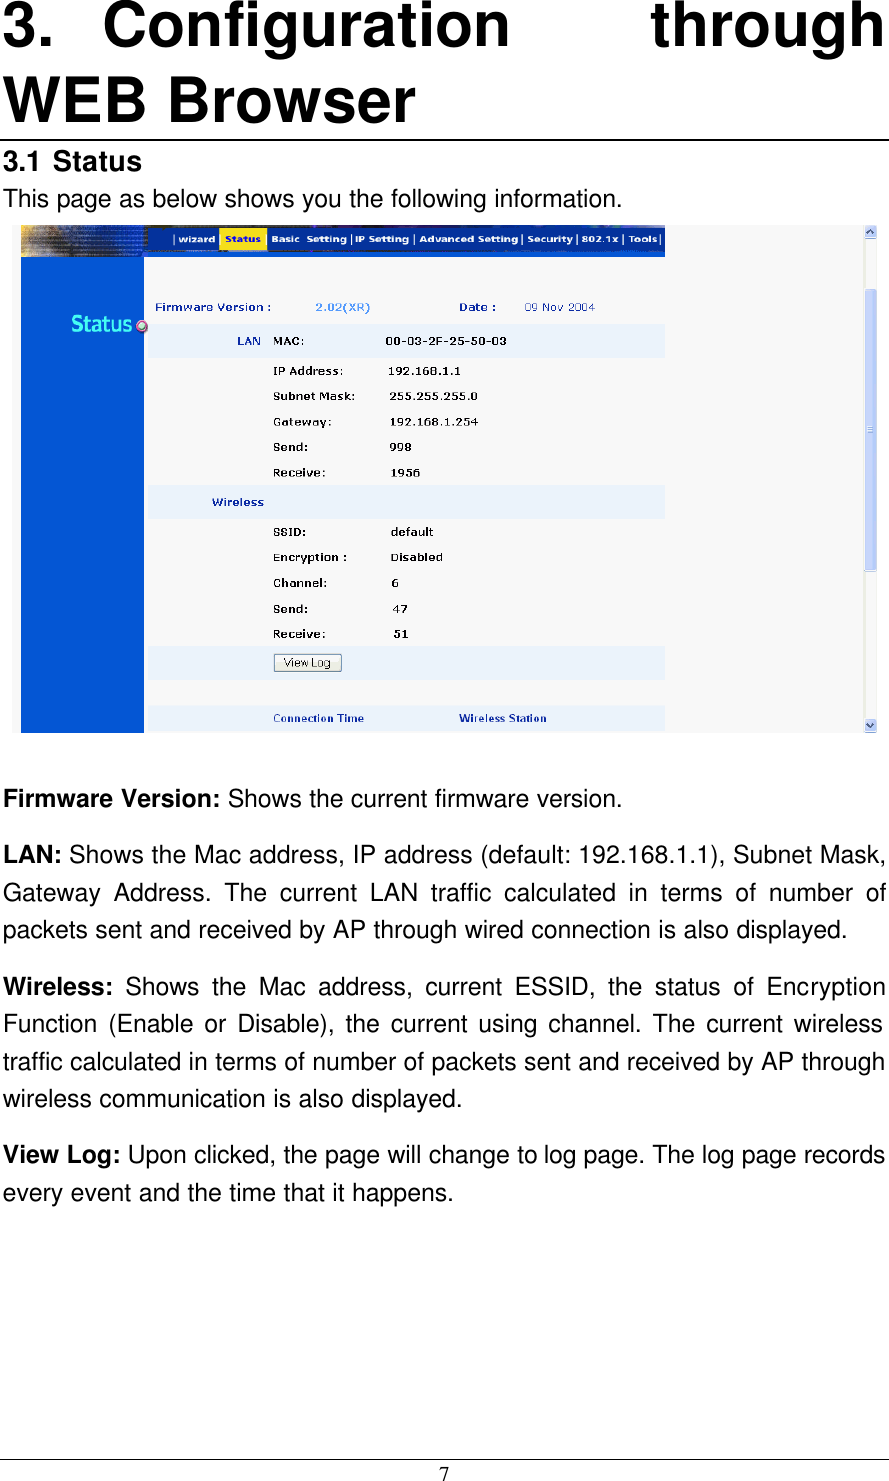 7 3. Configuration through WEB Browser 3.1 Status This page as below shows you the following information.   Firmware Version: Shows the current firmware version. LAN: Shows the Mac address, IP address (default: 192.168.1.1), Subnet Mask, Gateway Address. The current LAN traffic calculated in terms of number of packets sent and received by AP through wired connection is also displayed. Wireless:  Shows the Mac address, current ESSID, the status of Encryption Function (Enable or Disable), the current using channel. The current wireless traffic calculated in terms of number of packets sent and received by AP through wireless communication is also displayed. View Log: Upon clicked, the page will change to log page. The log page records every event and the time that it happens. 